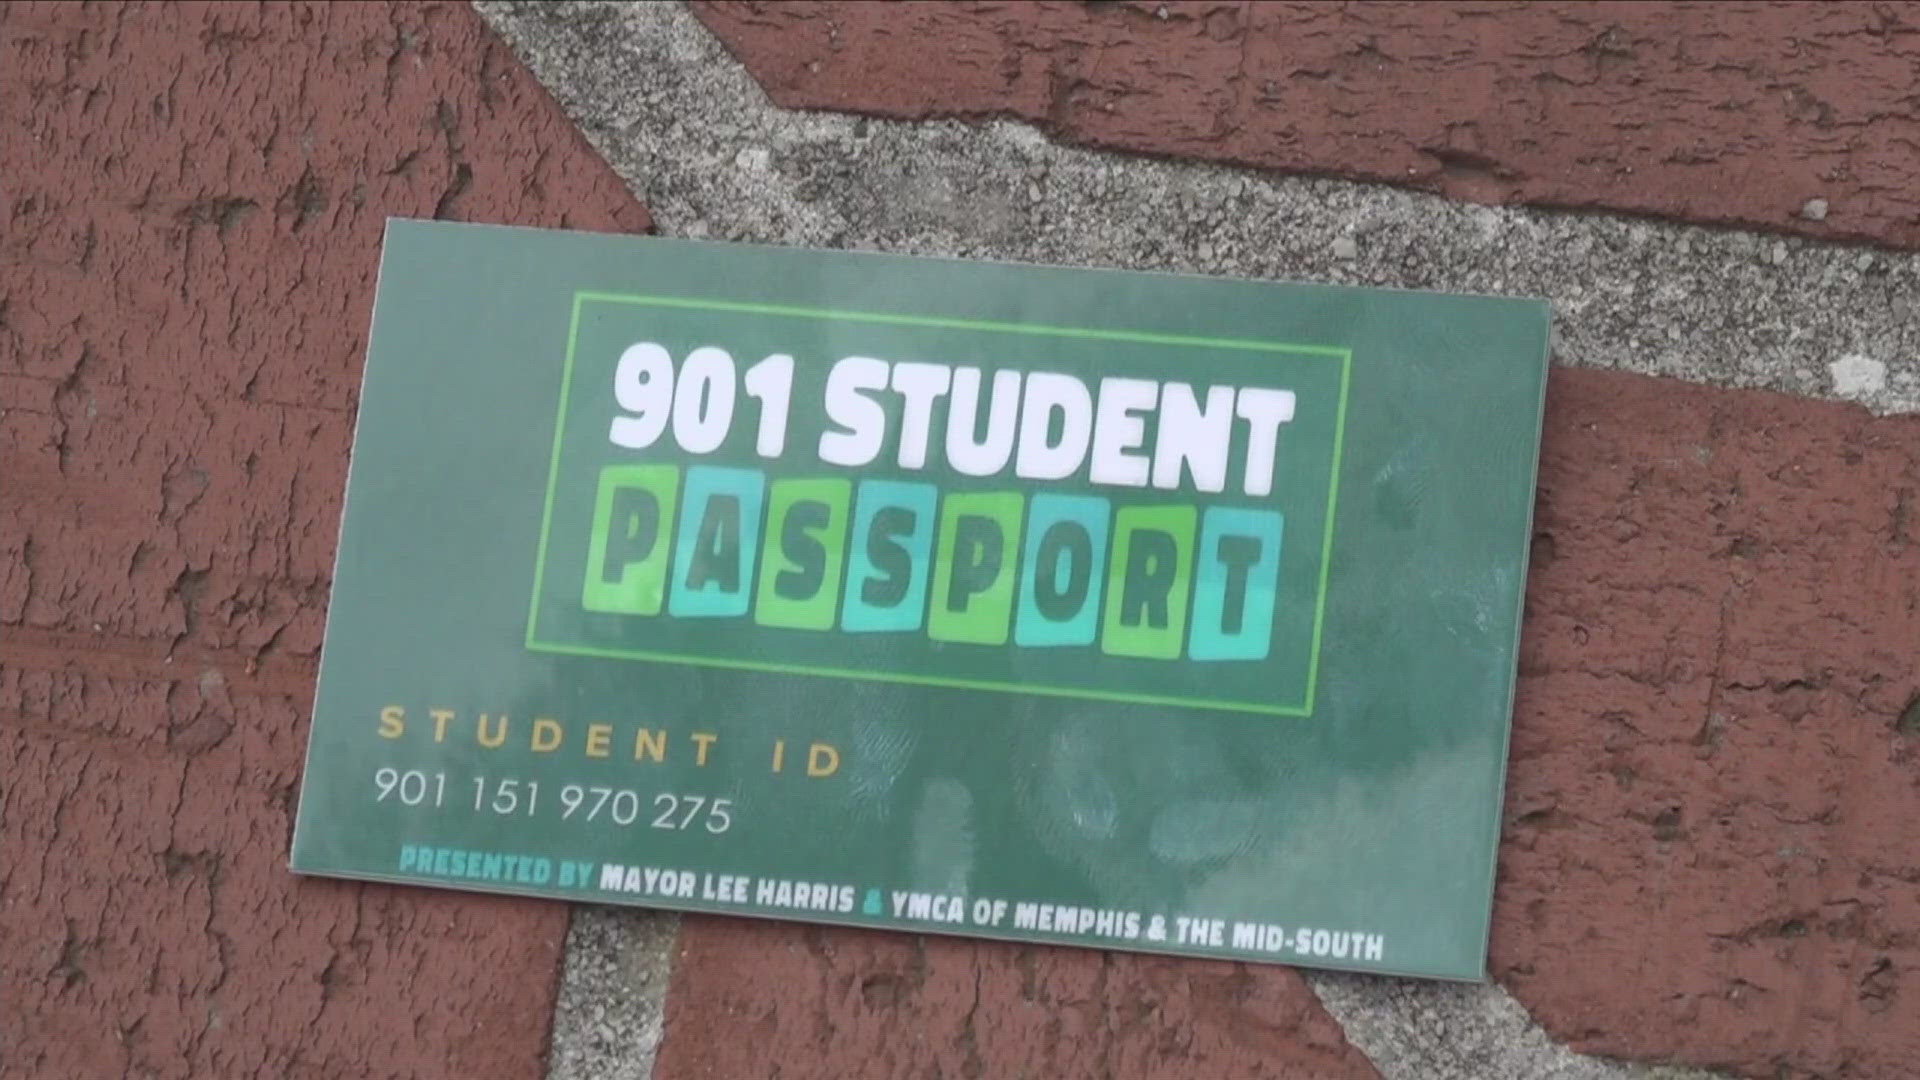 Shelby County is partnering with community organizations once again for the fourth year of the 901 Student Passport program.